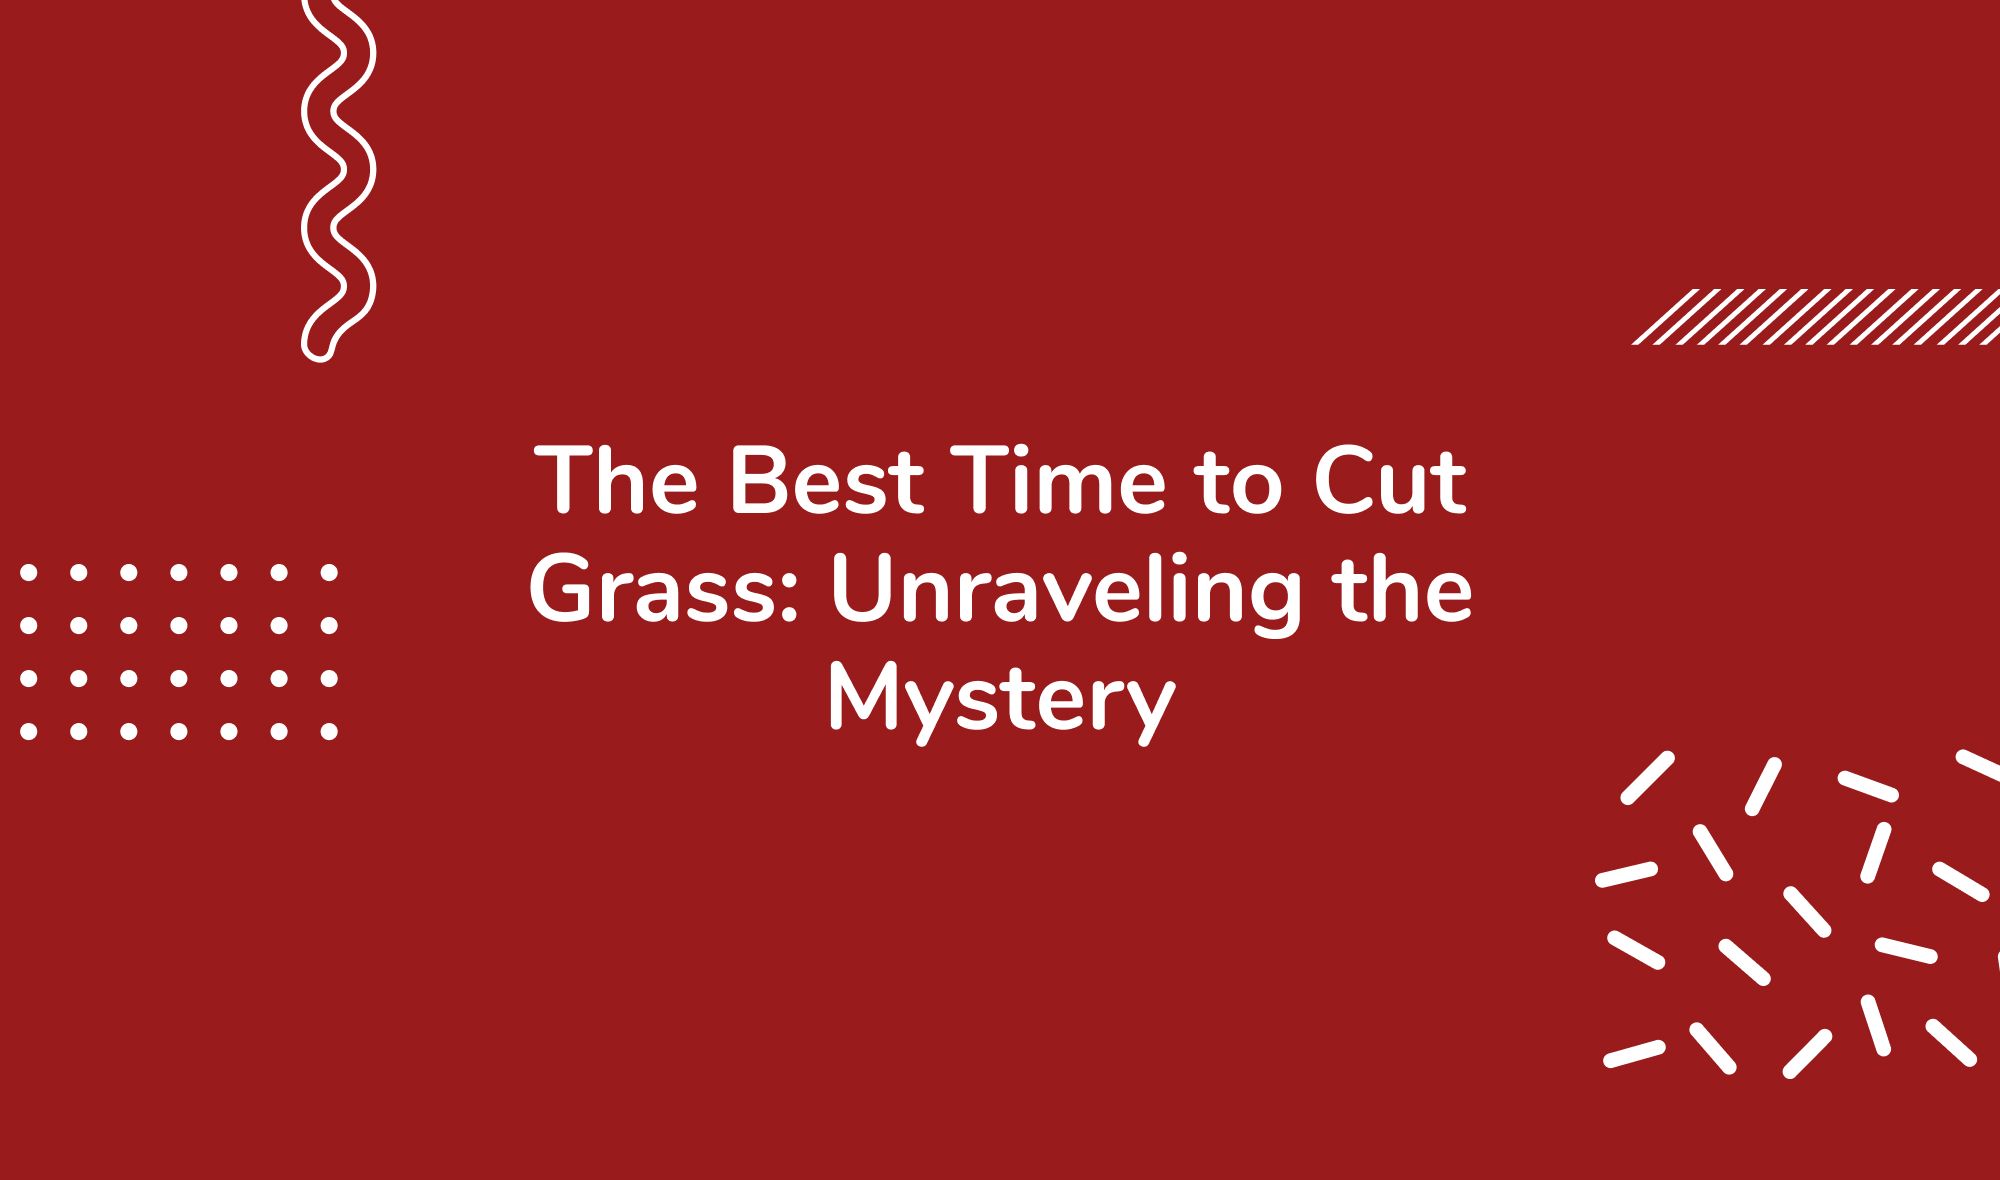 The Best Time to Cut Grass: Unraveling the Mystery